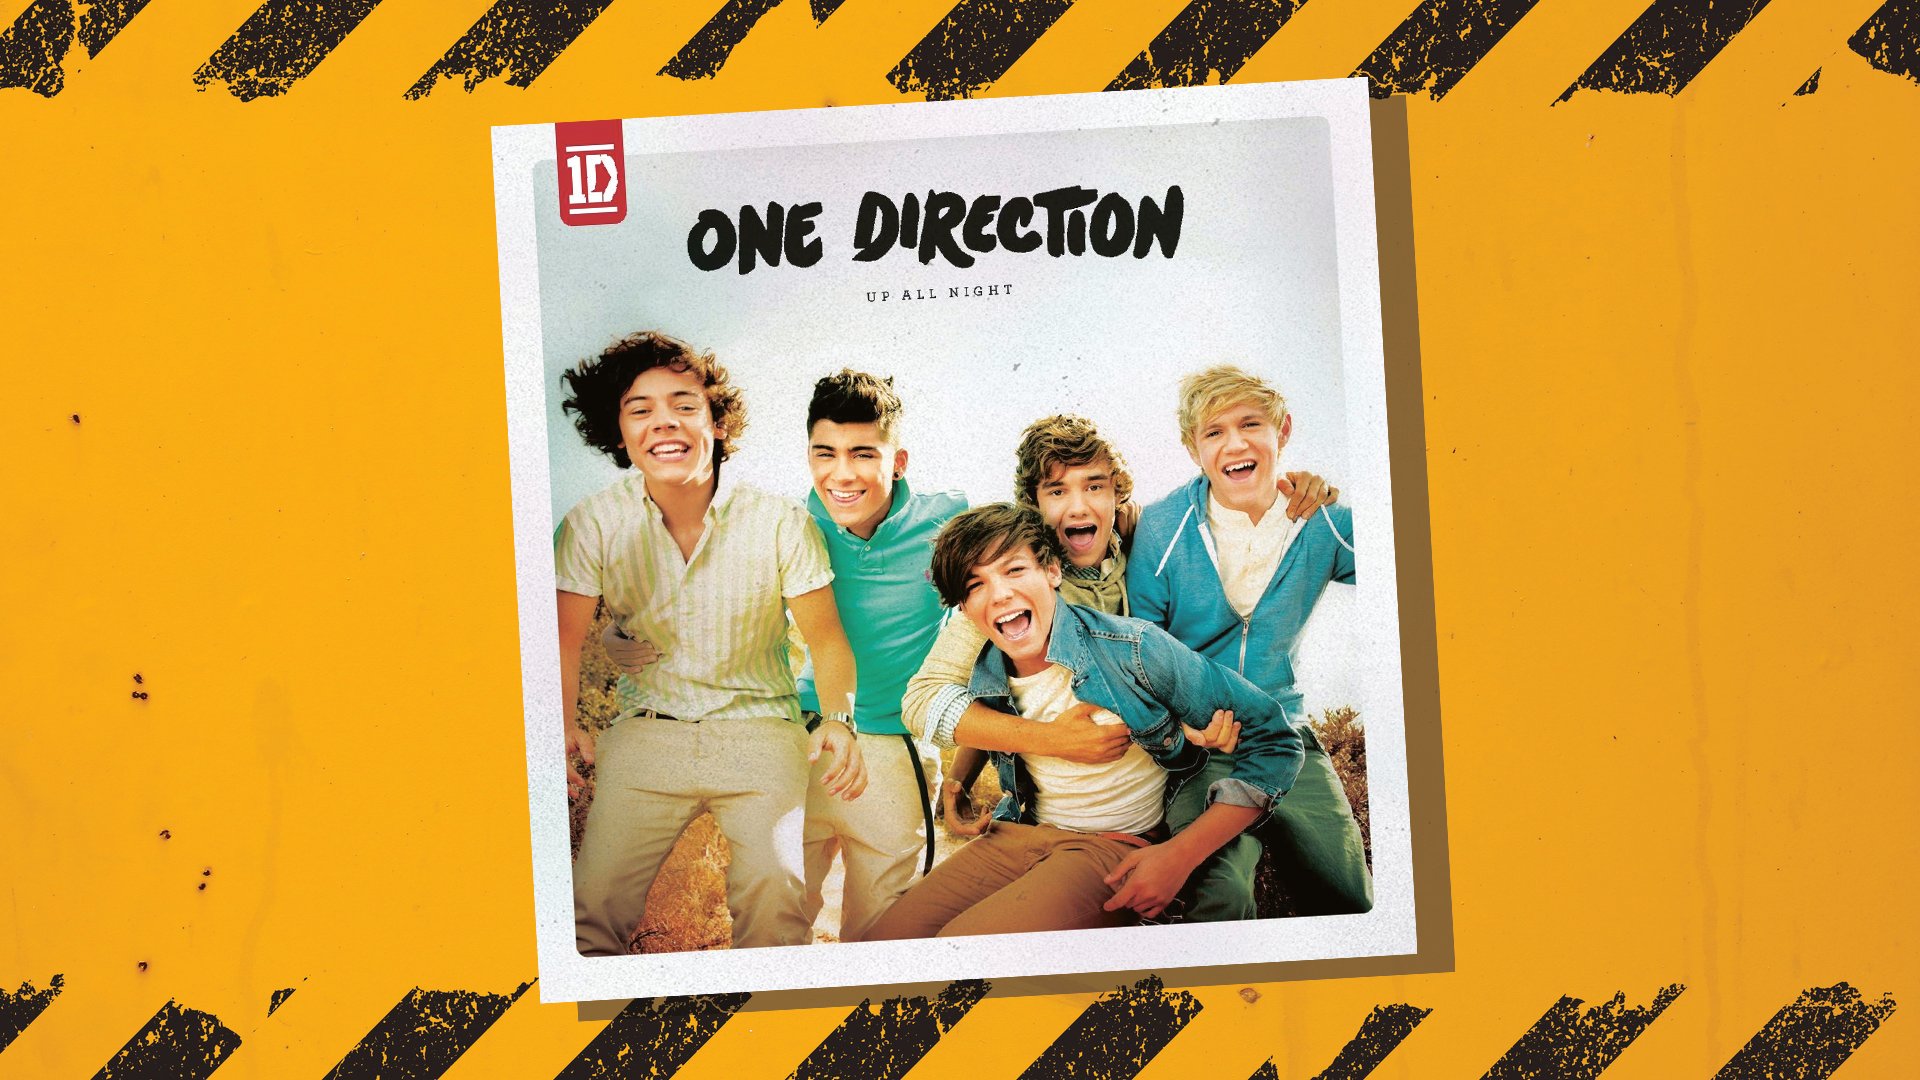 One Direction's album Up All Night 